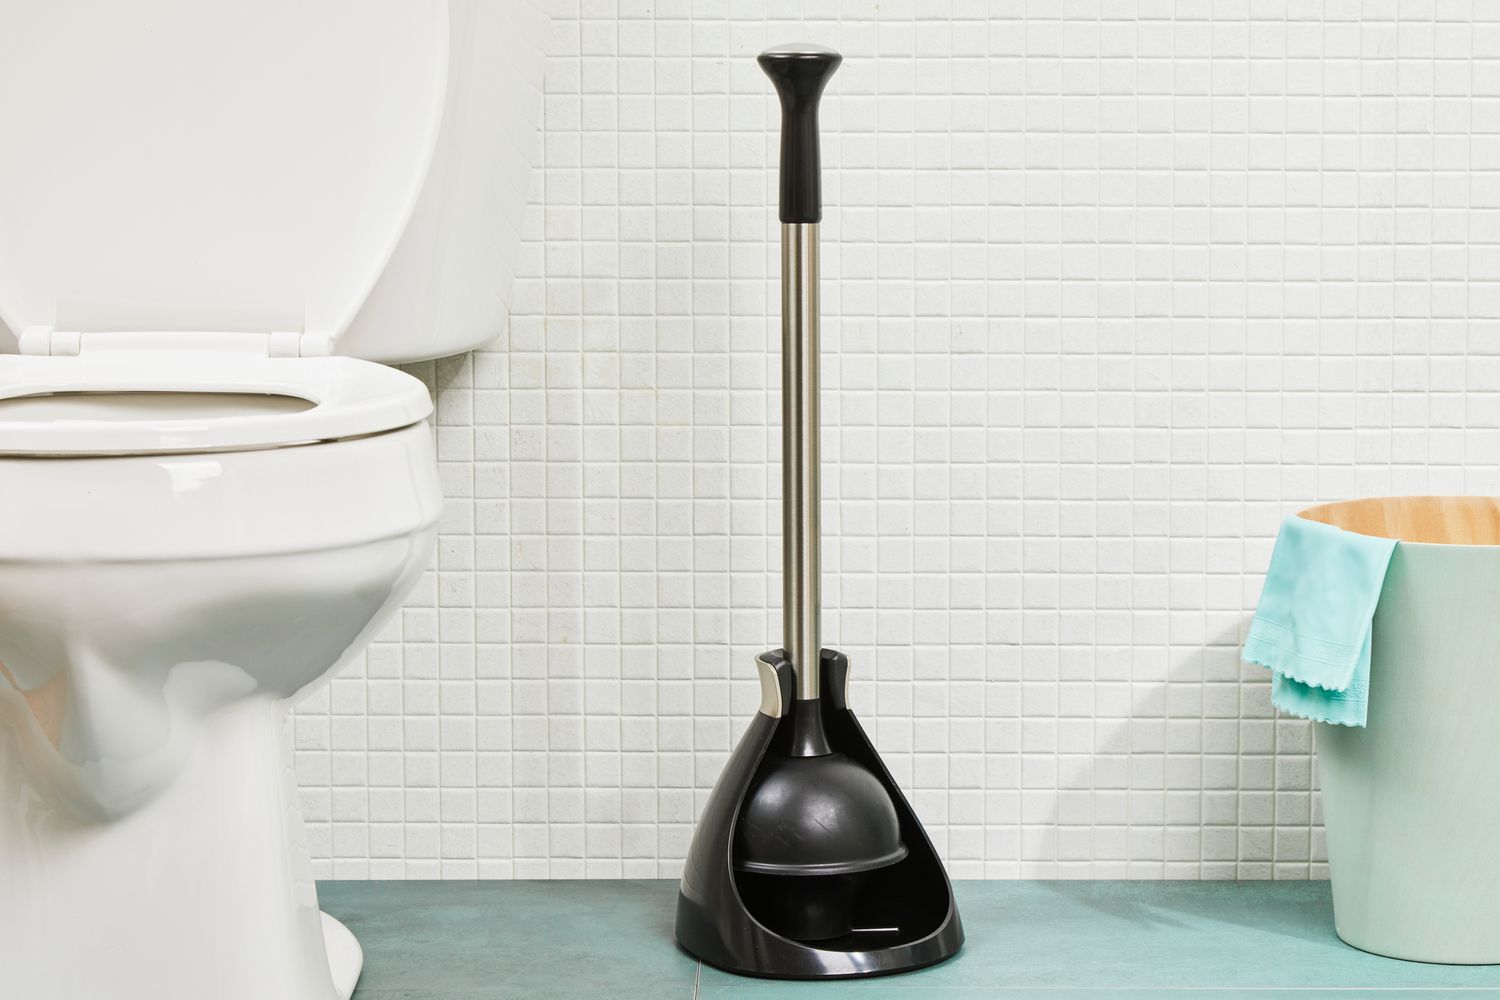 How To Hide Your Plunger And Toilet Brush